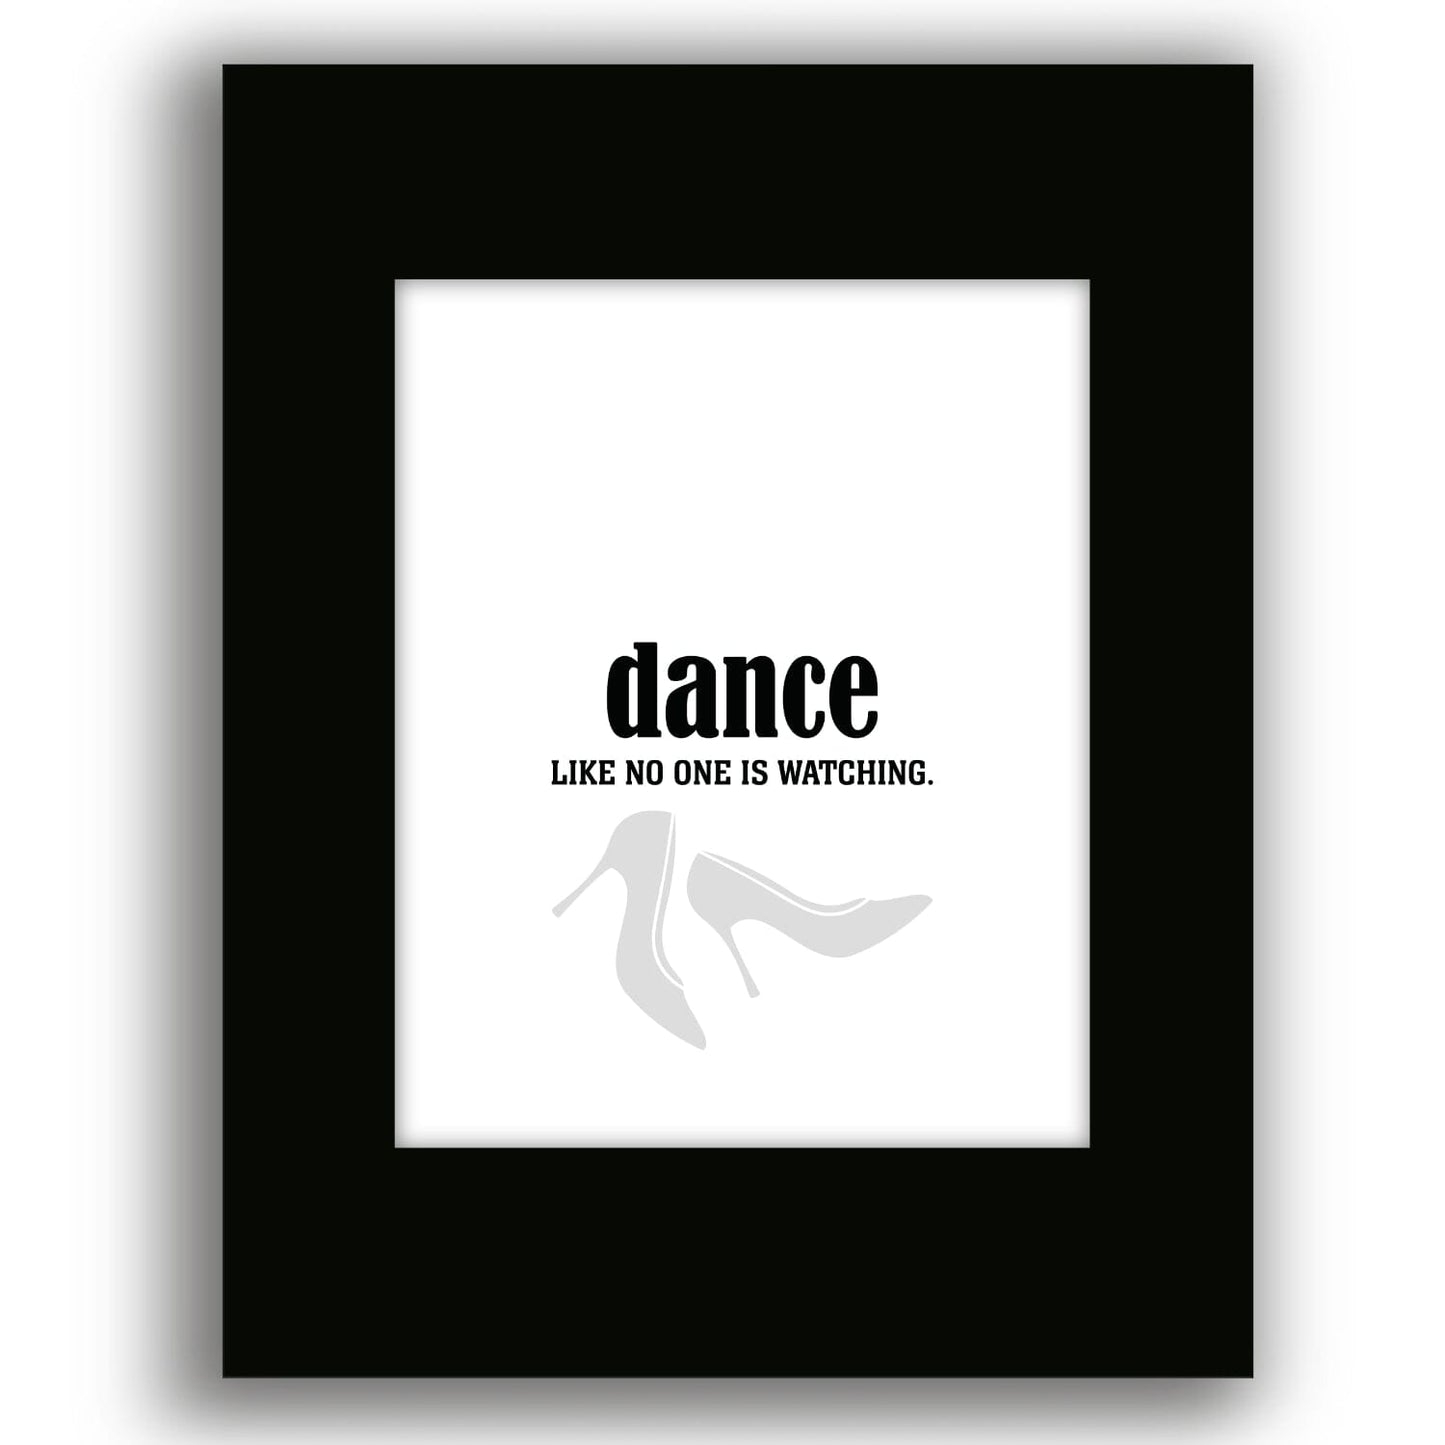 Dance Like No One is Watching - Wise and Witty Art Print Wise and Wiseass Quotes Song Lyrics Art 8x10 Black Matted Print 